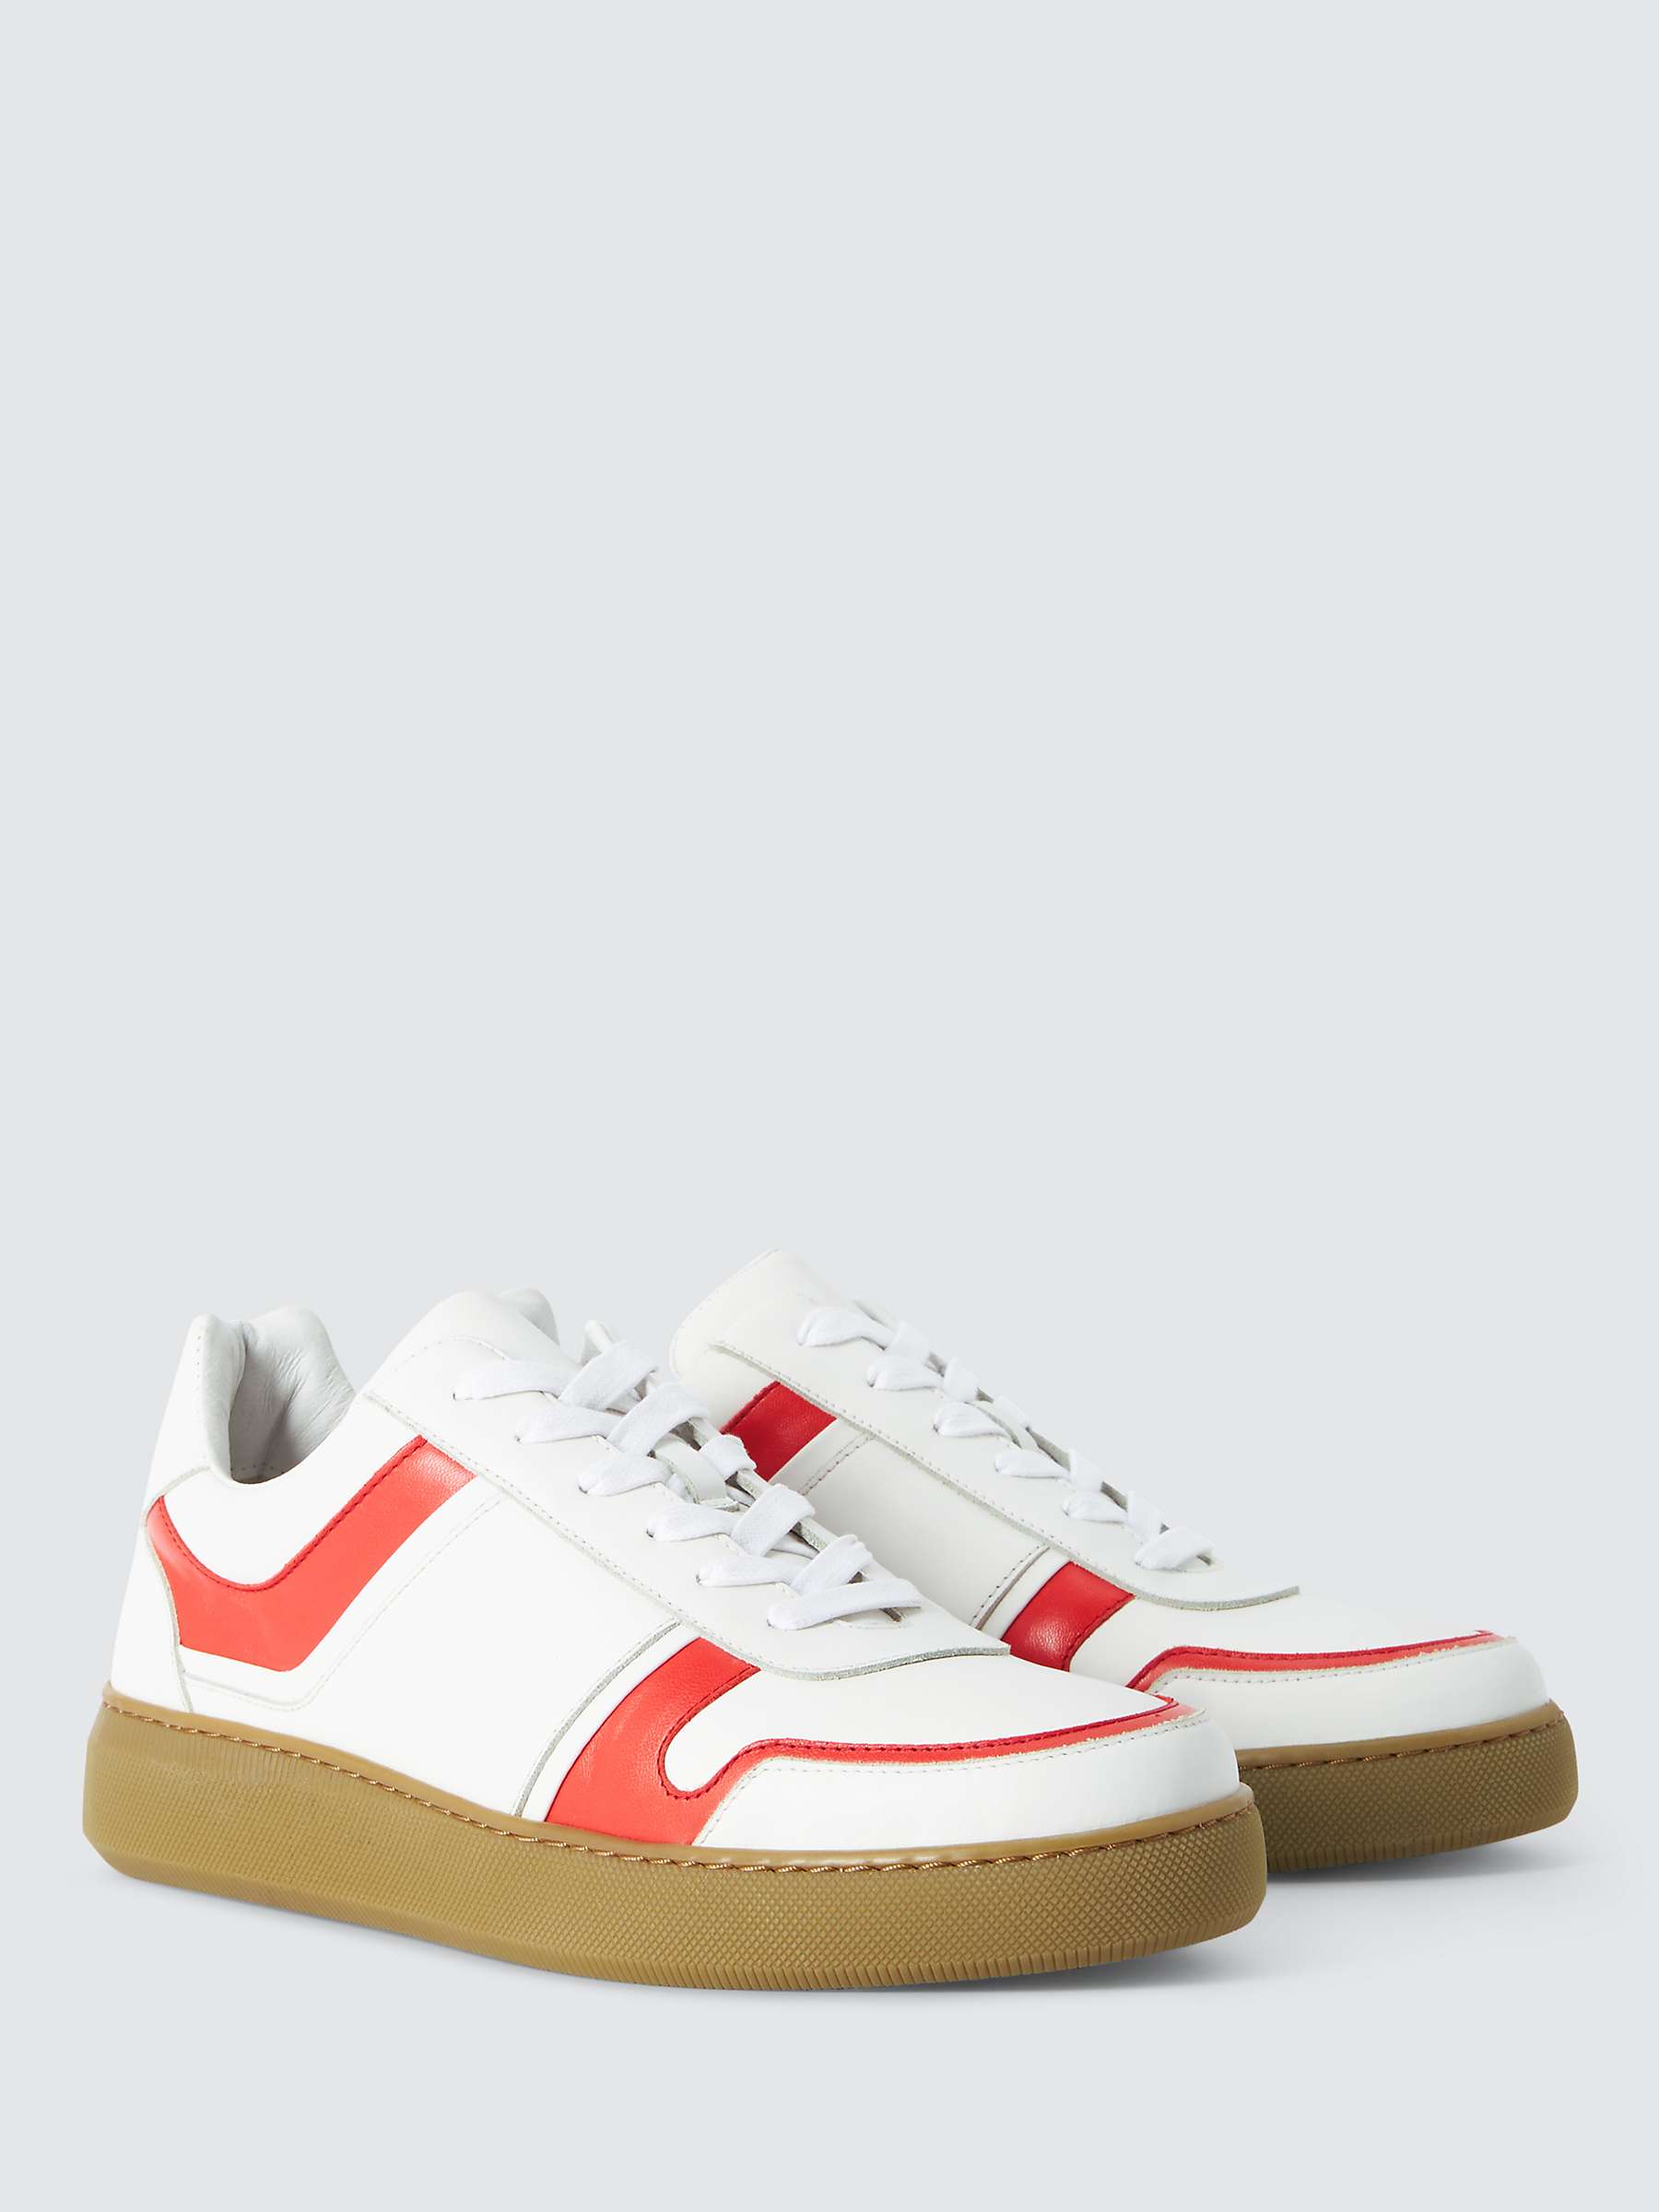 Buy John Lewis Flynne Leather Collegiate Cupsole Trainers Online at johnlewis.com